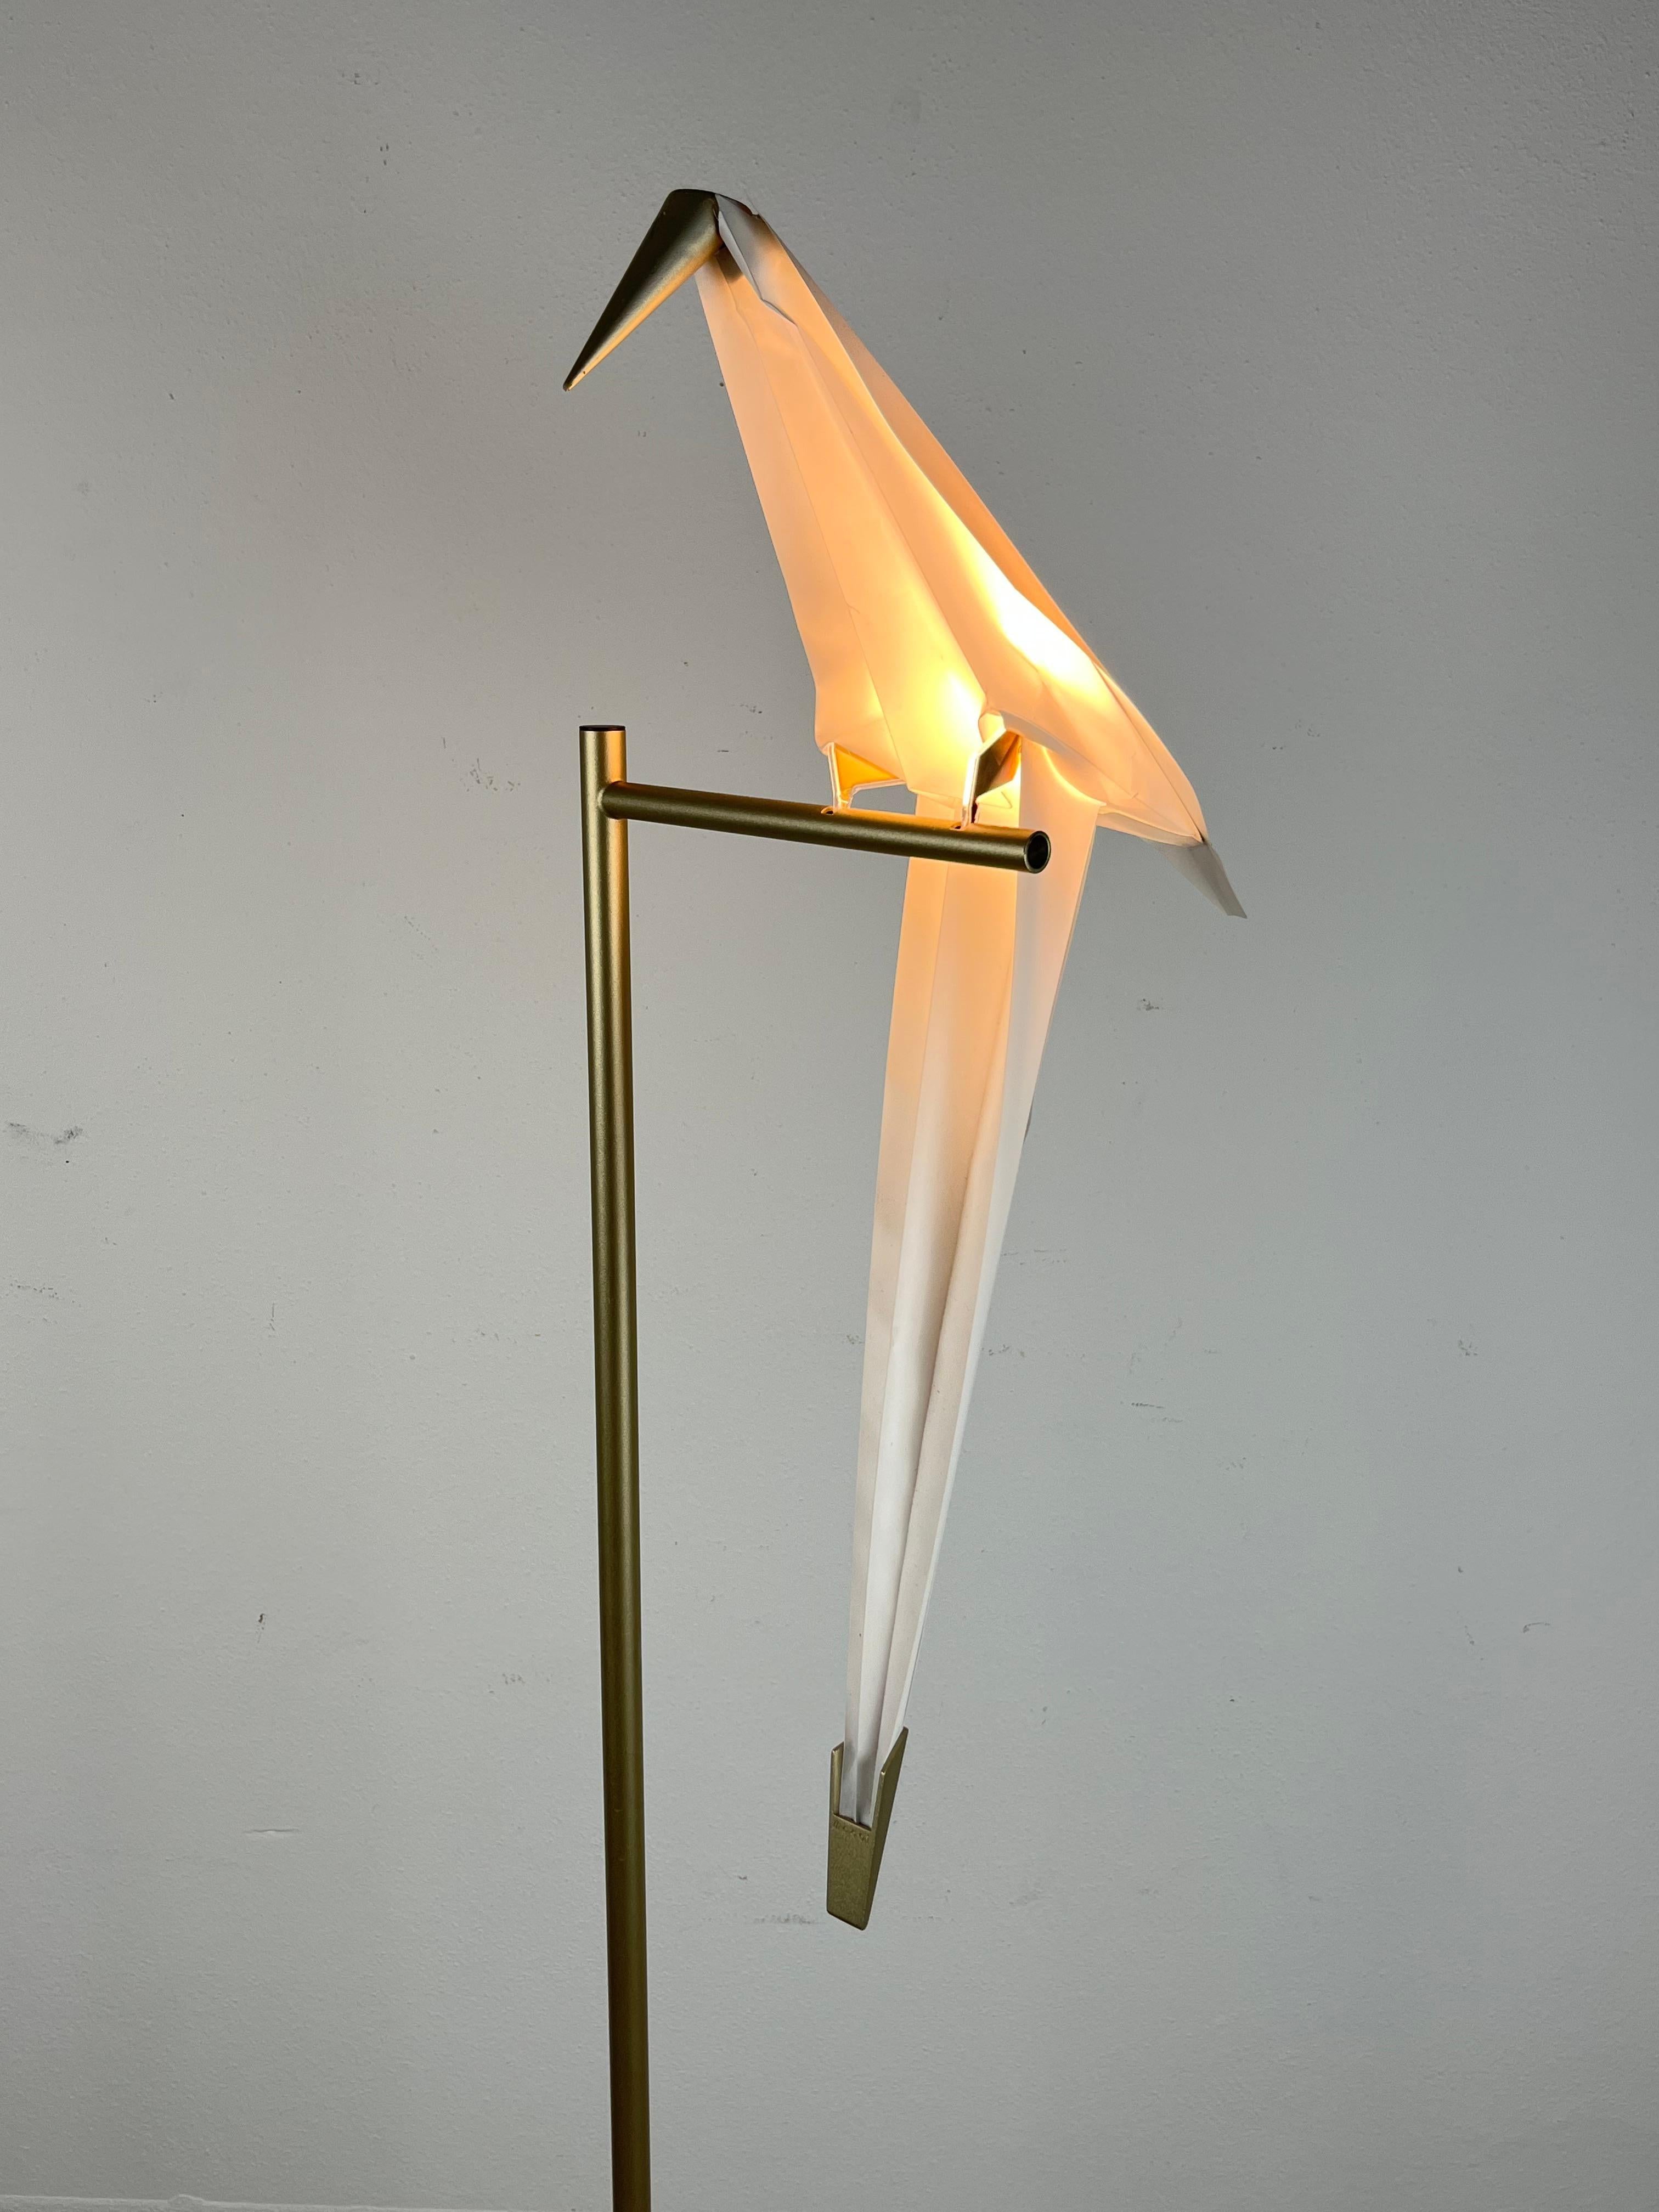 Moooi Perch Light Bird LED floor lamp by Umut Yamac, Netherlands, 2017
 Structure in steel and brass with a bird in polycarbonate (PC) and synthetic paper, the Moooi lamp is characterized by an origami bird-shaped, finished with a brass-coloured